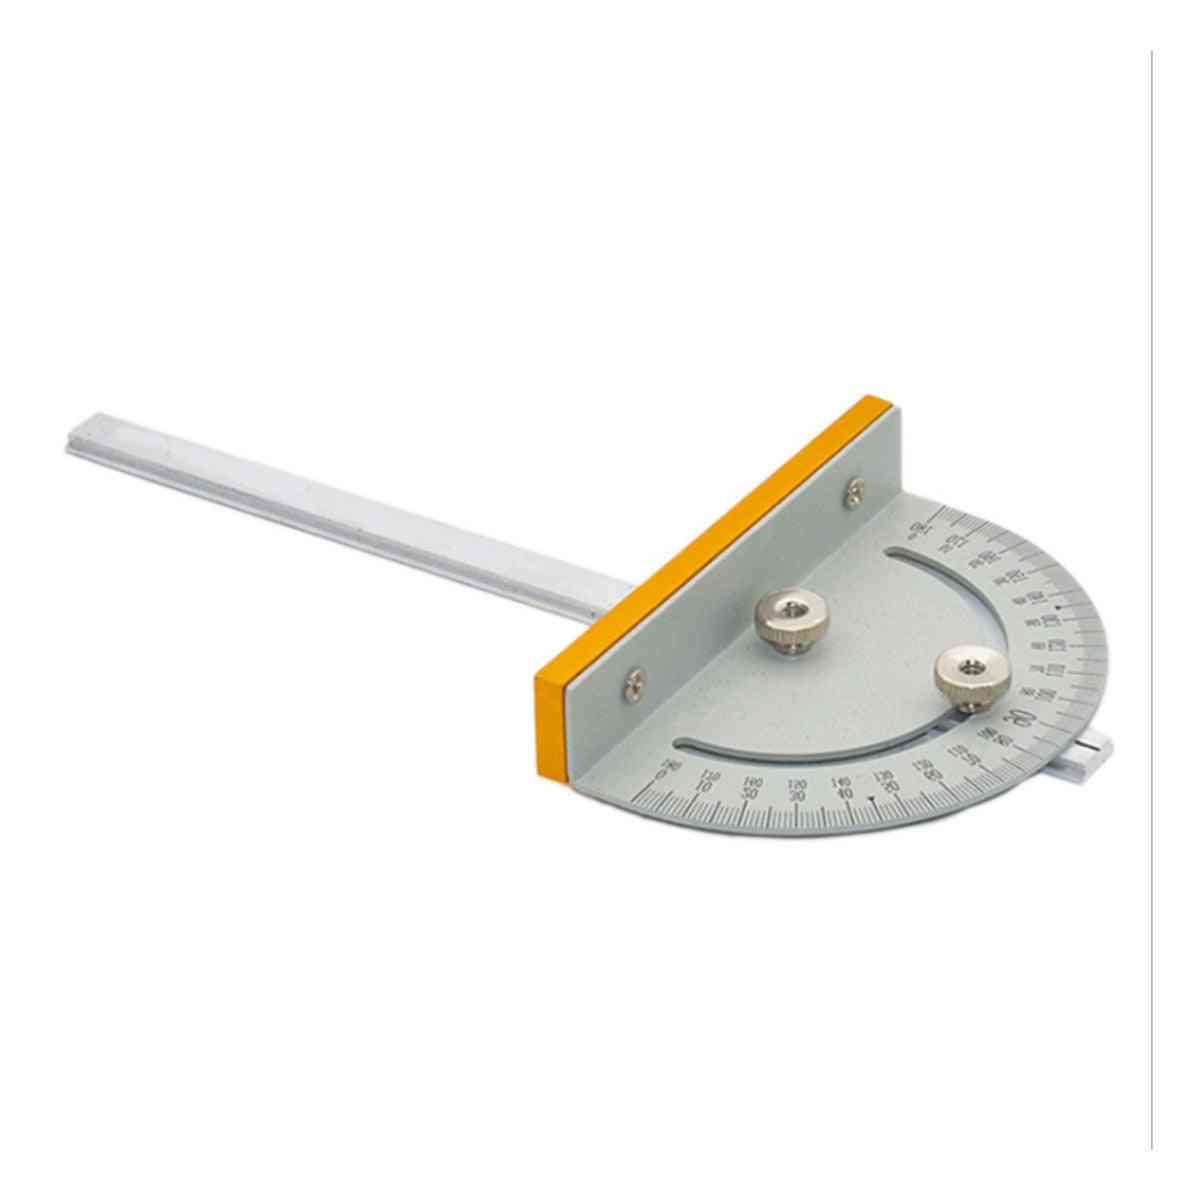 Mini Table Saw, Circular Miter Gauge Machines, T-style Angle Ruler With Handle